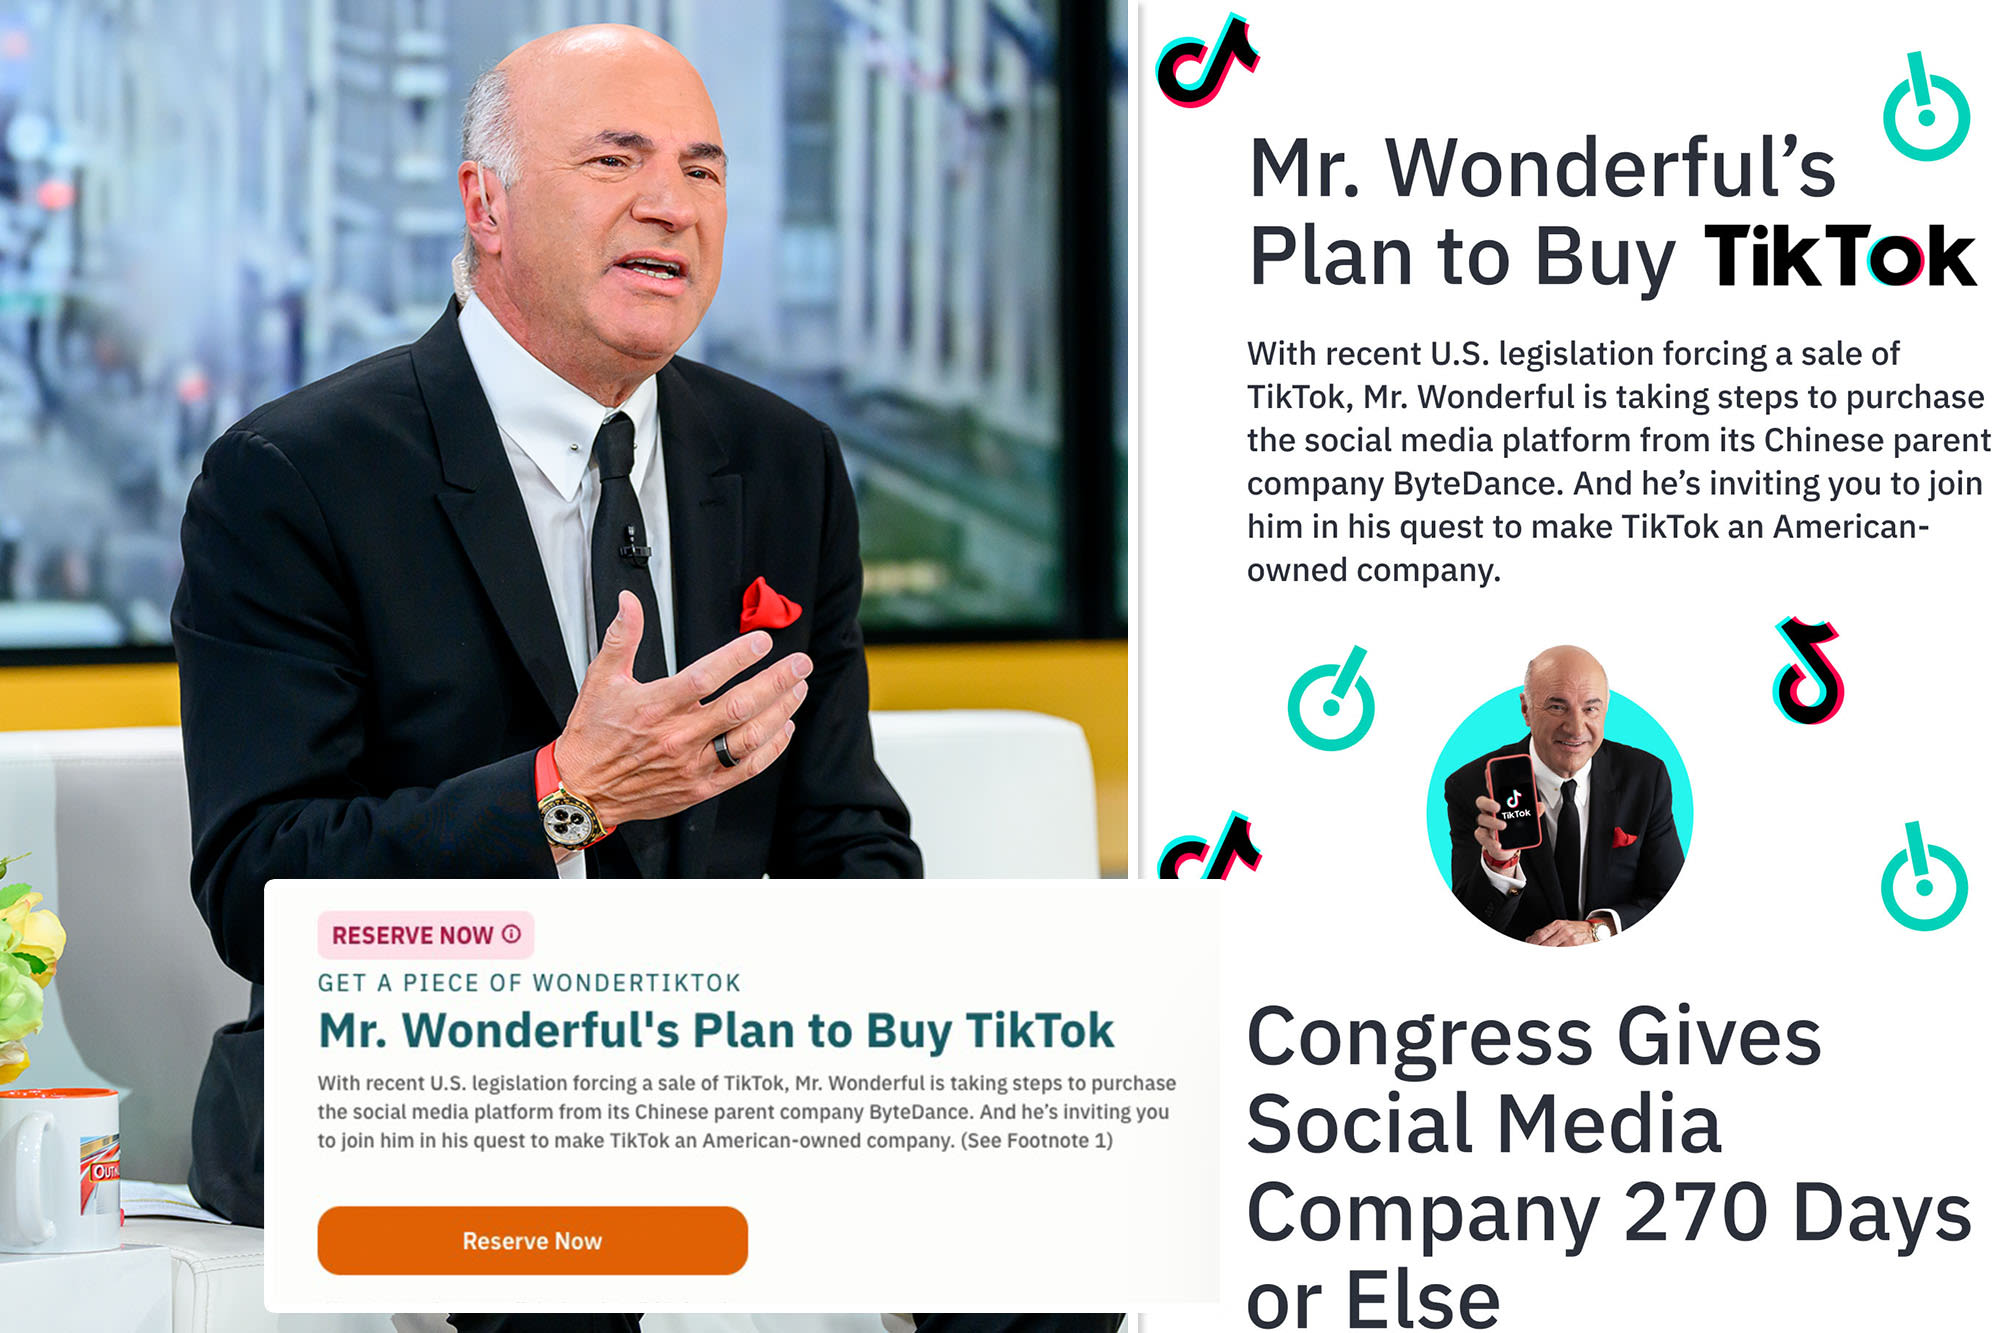 ‘Shark Tank’ star Kevin O’Leary wants to buy TikTok in a crowdfunded deal